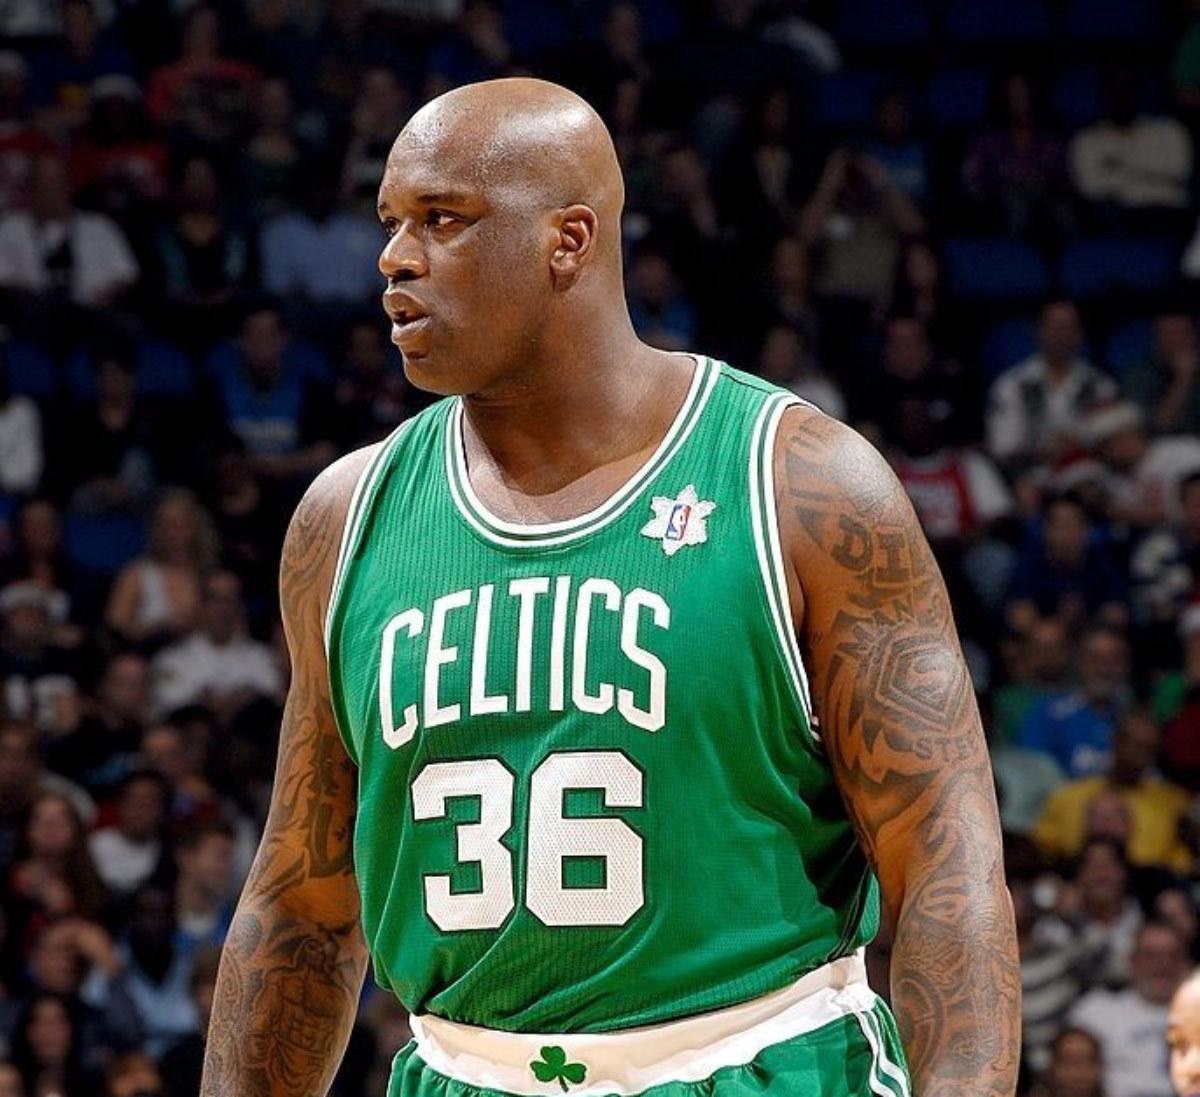 Comedian Bubba Dub Roasts Shaquille O'Neal On His Podcast: "Aye, Shaq, When You Were At The Boston Celtics, You Were Trash. He Was Terrible."